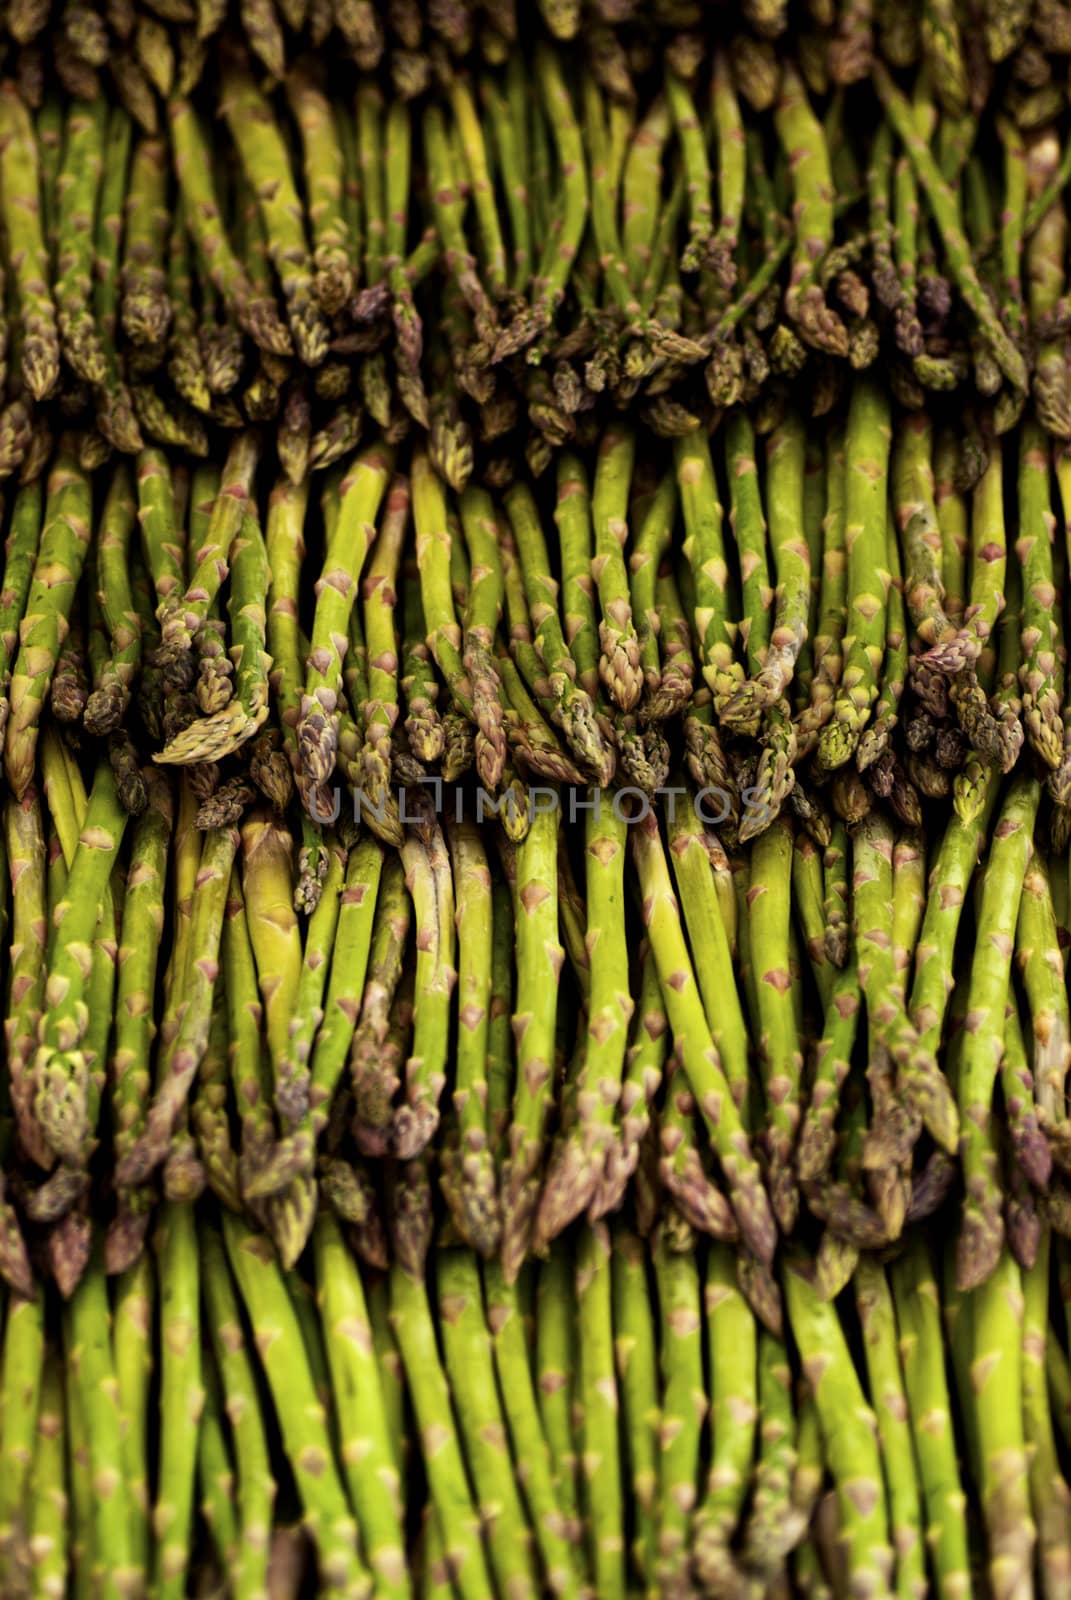 Asparagus lined up for sale on a market